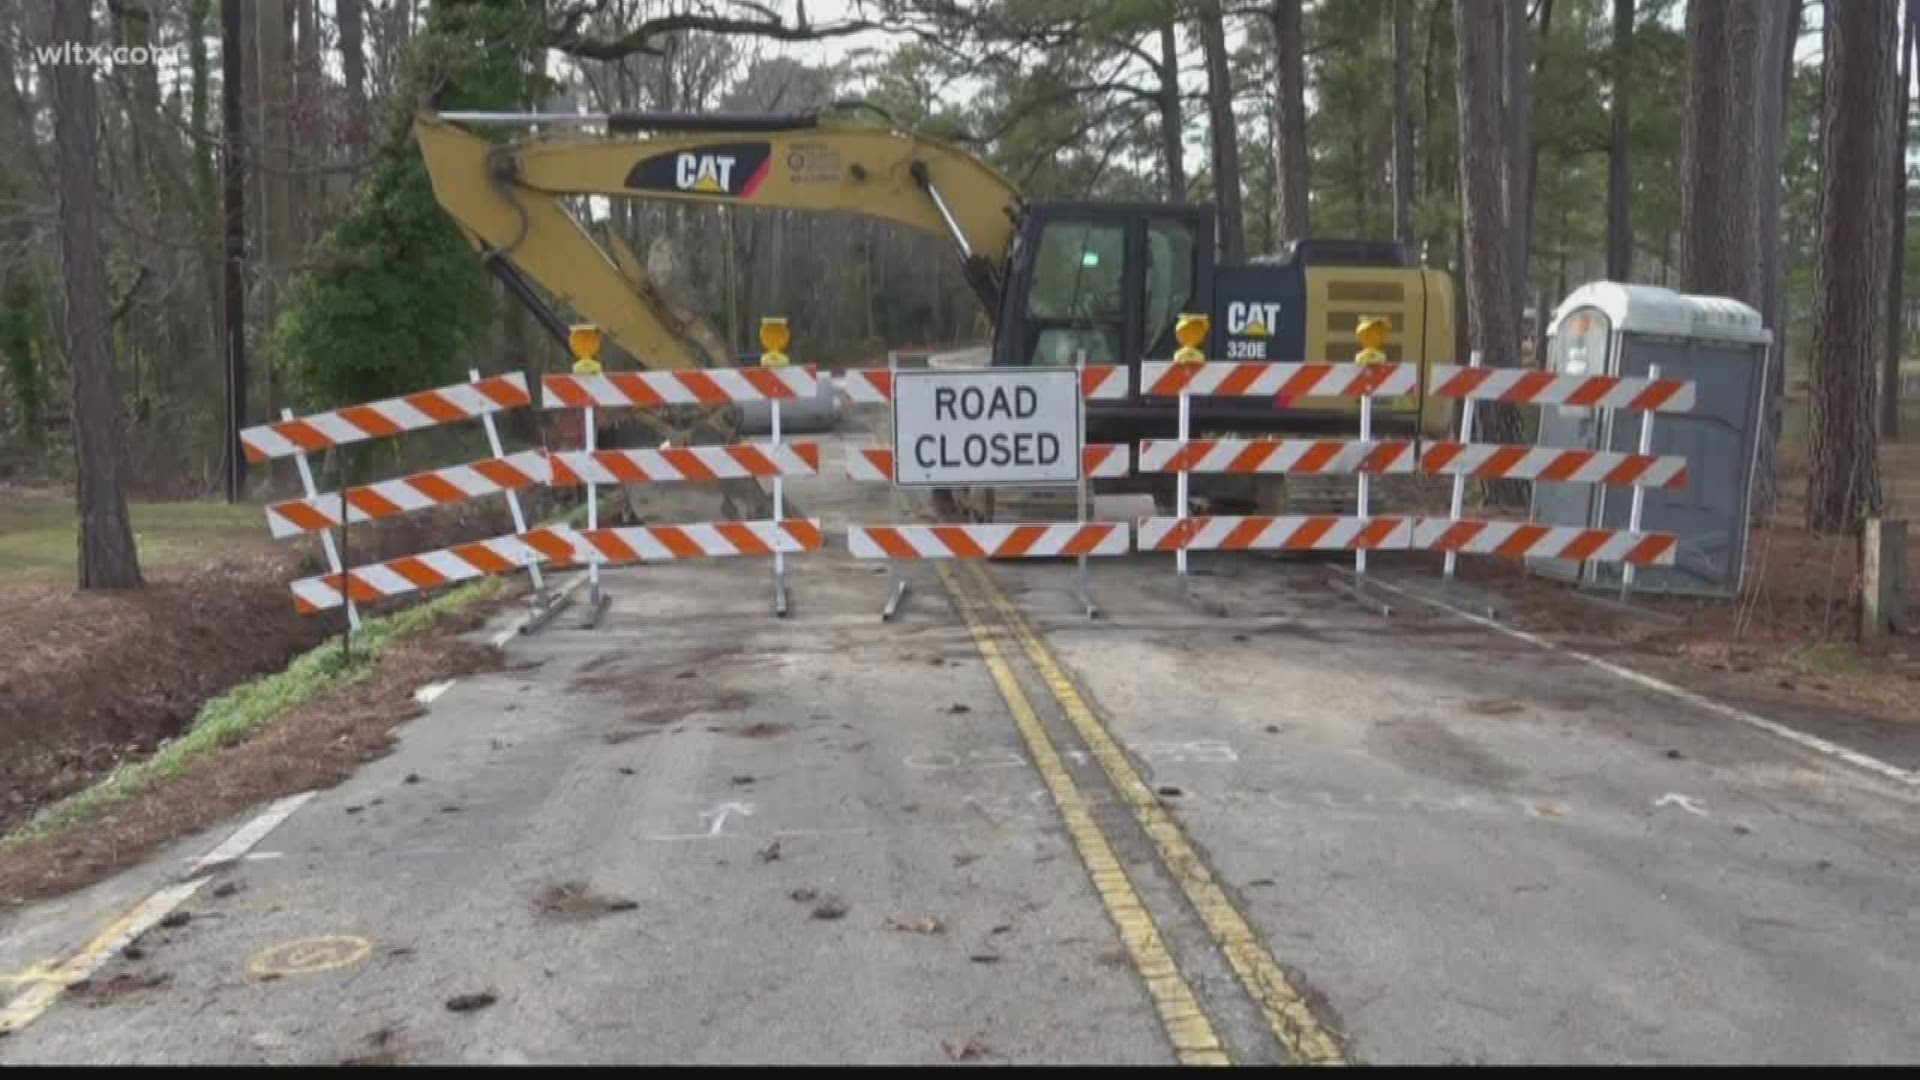 This once frequently traveled road has been closed since being washed out in the flood of October 2015.